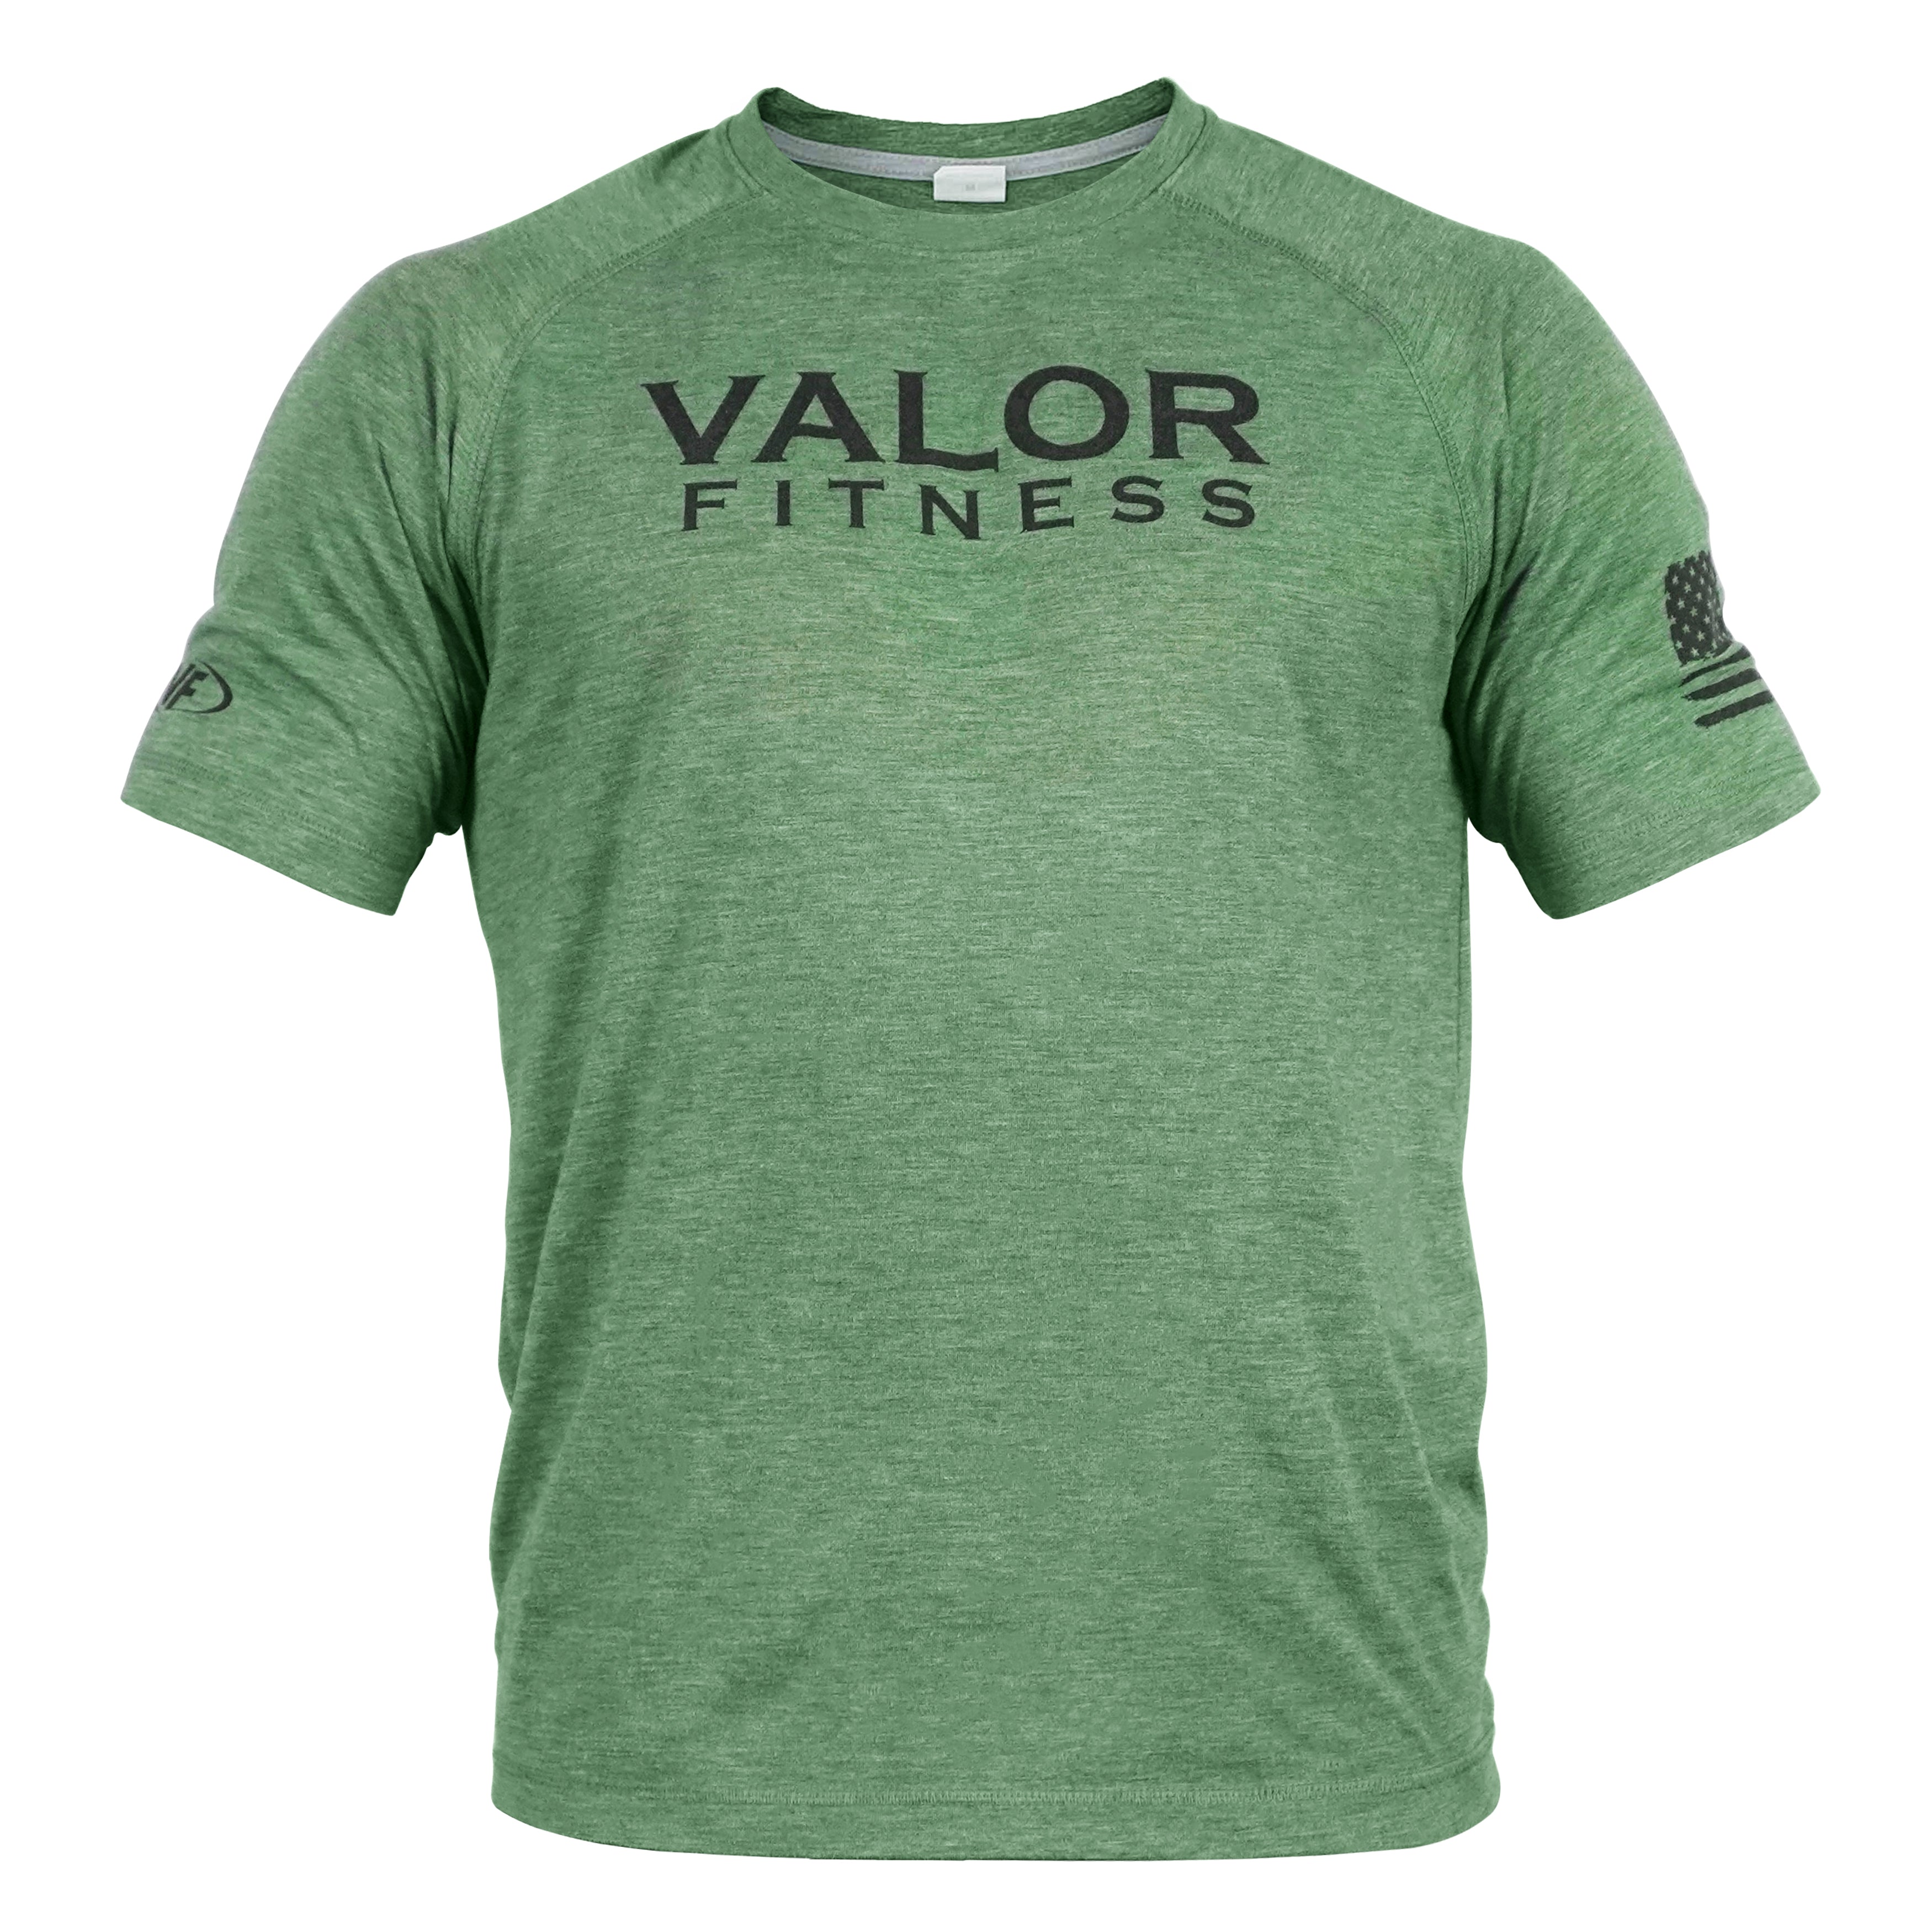 Valor Fitness Clothing - Design with Discipline and Purpose